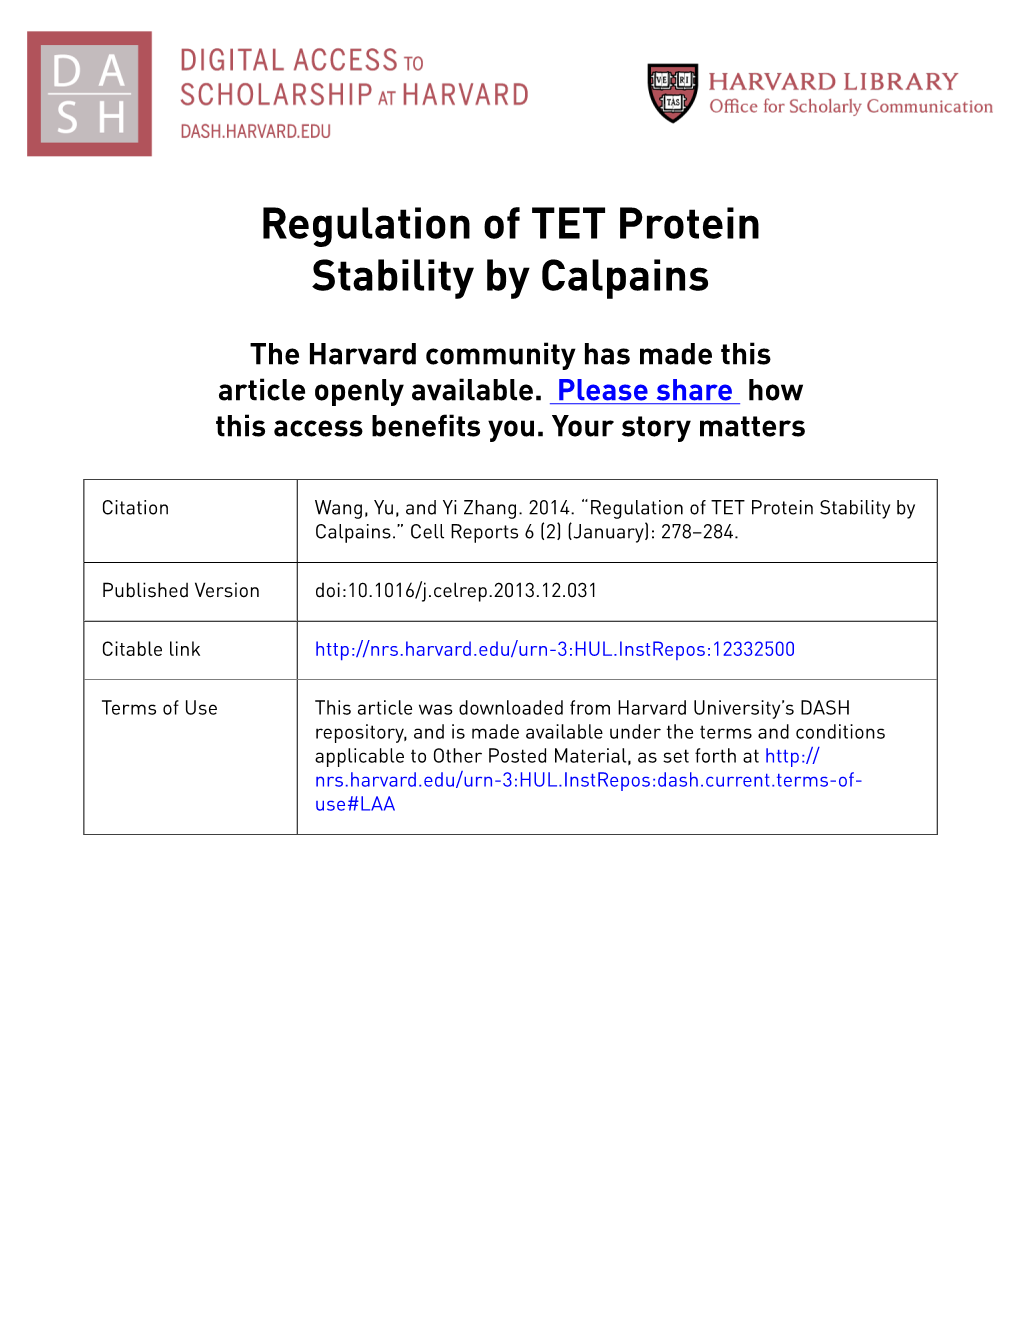 Regulation of TET Protein Stability by Calpains